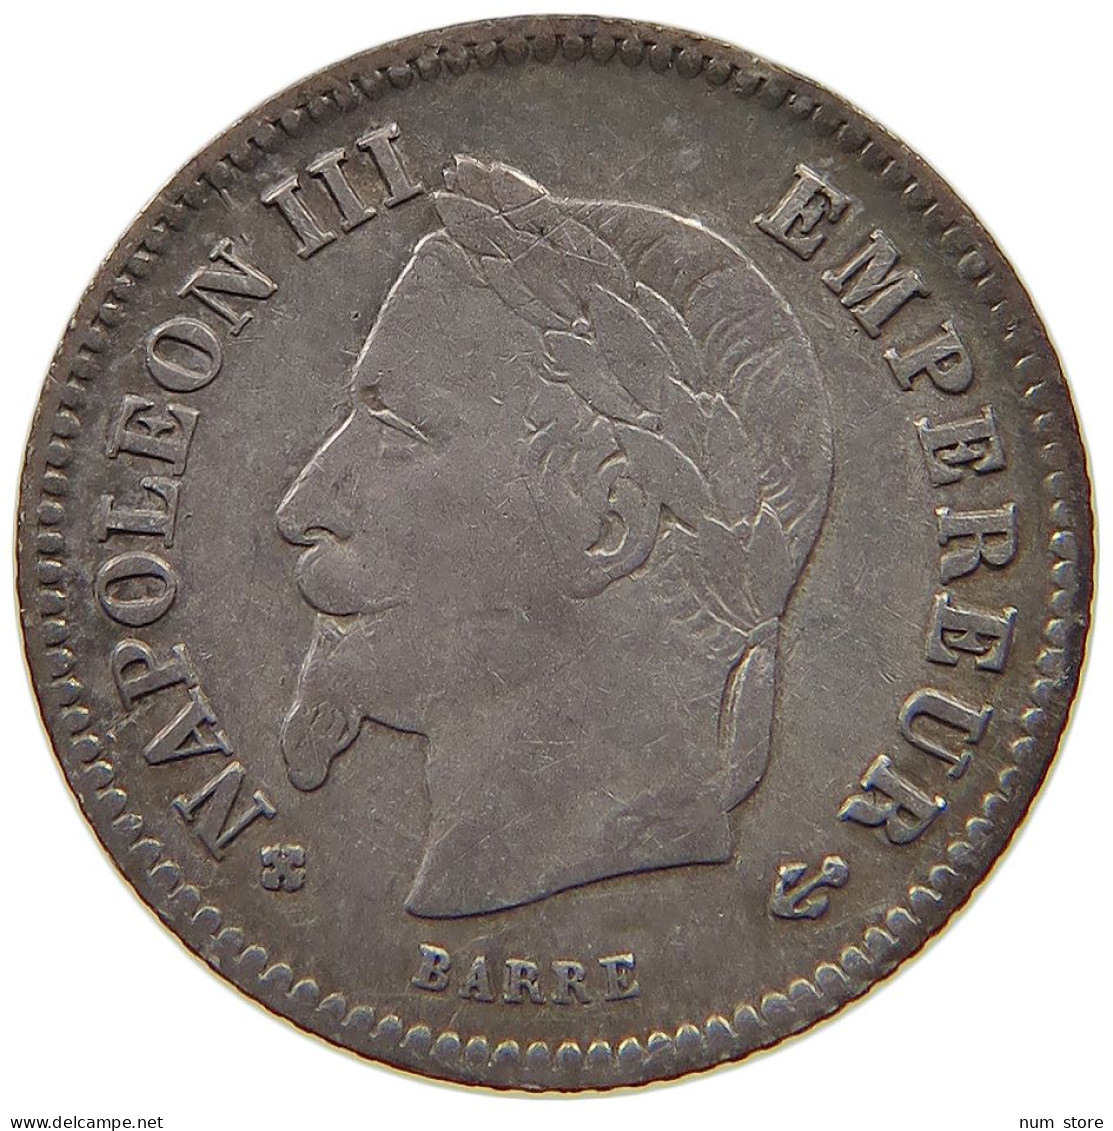 FRANCE 20 CENTIMES 1868 BB Napoleon III. (1852-1870) #t058 0269 - 20 Centimes